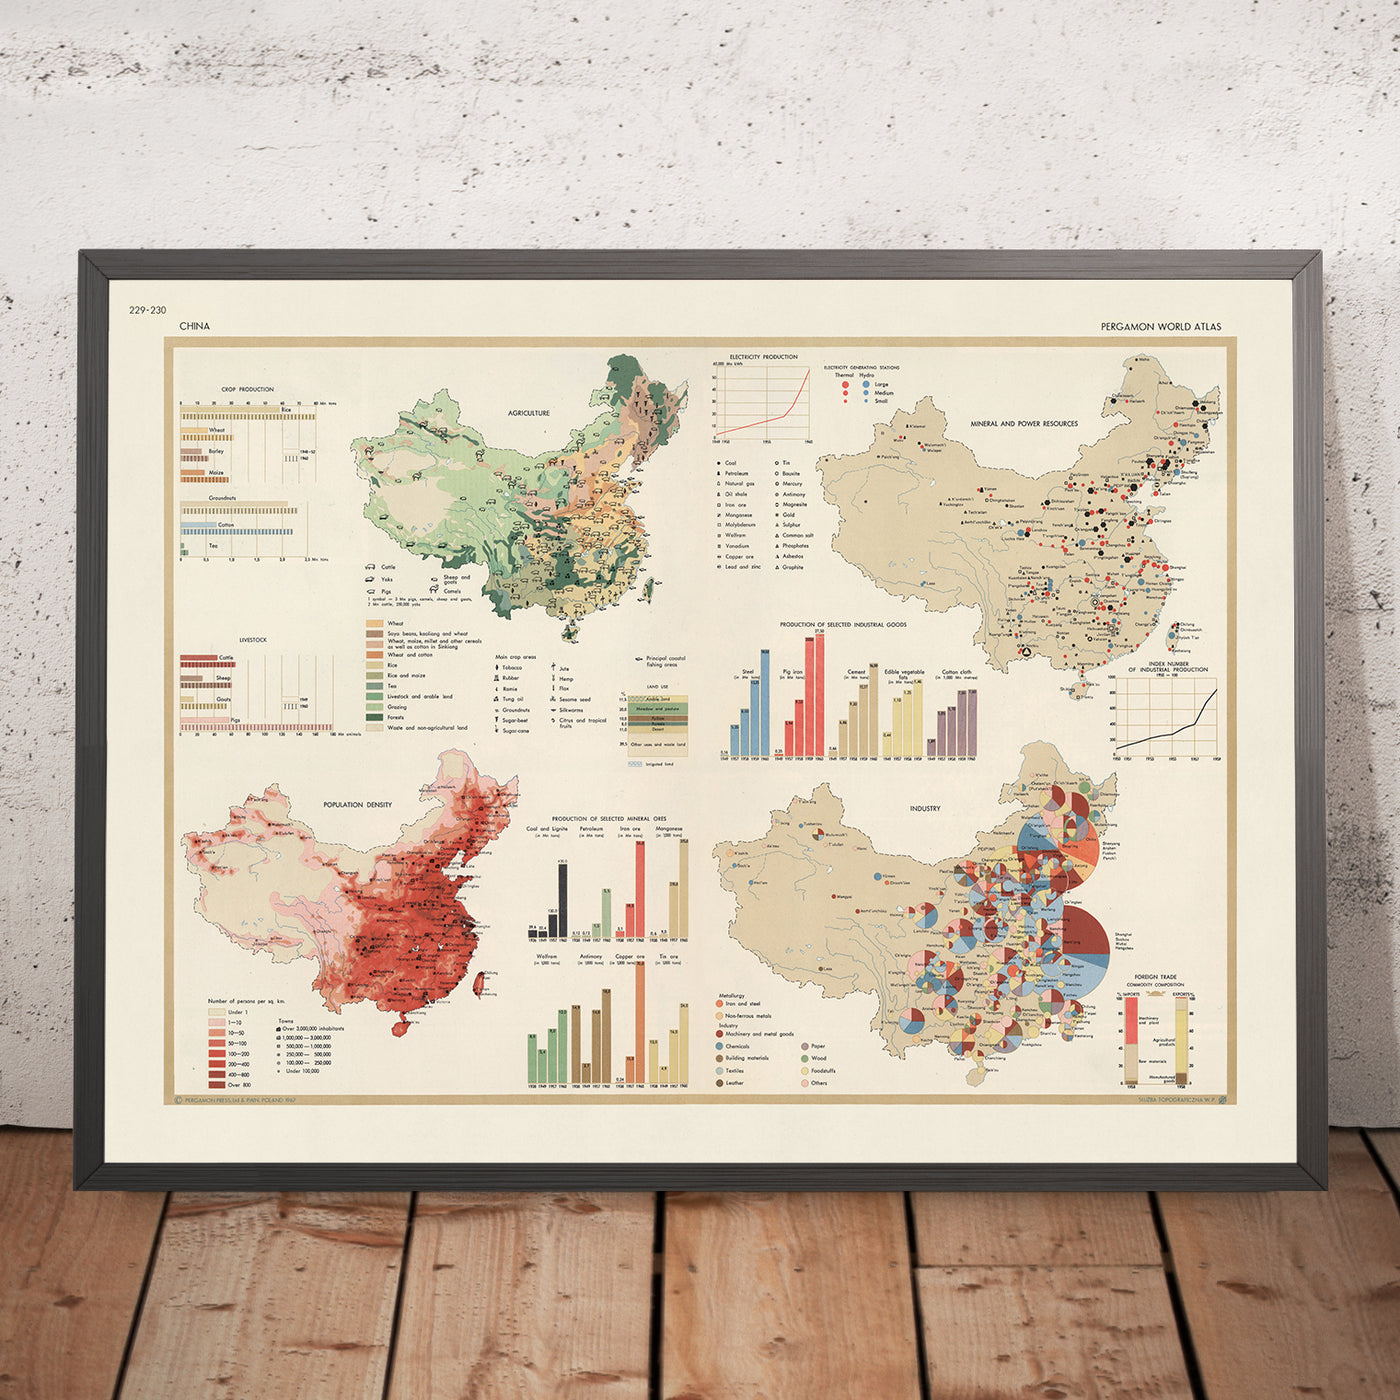 Old Infographic Map of China, 1967: Agriculture, Industry, and Trade